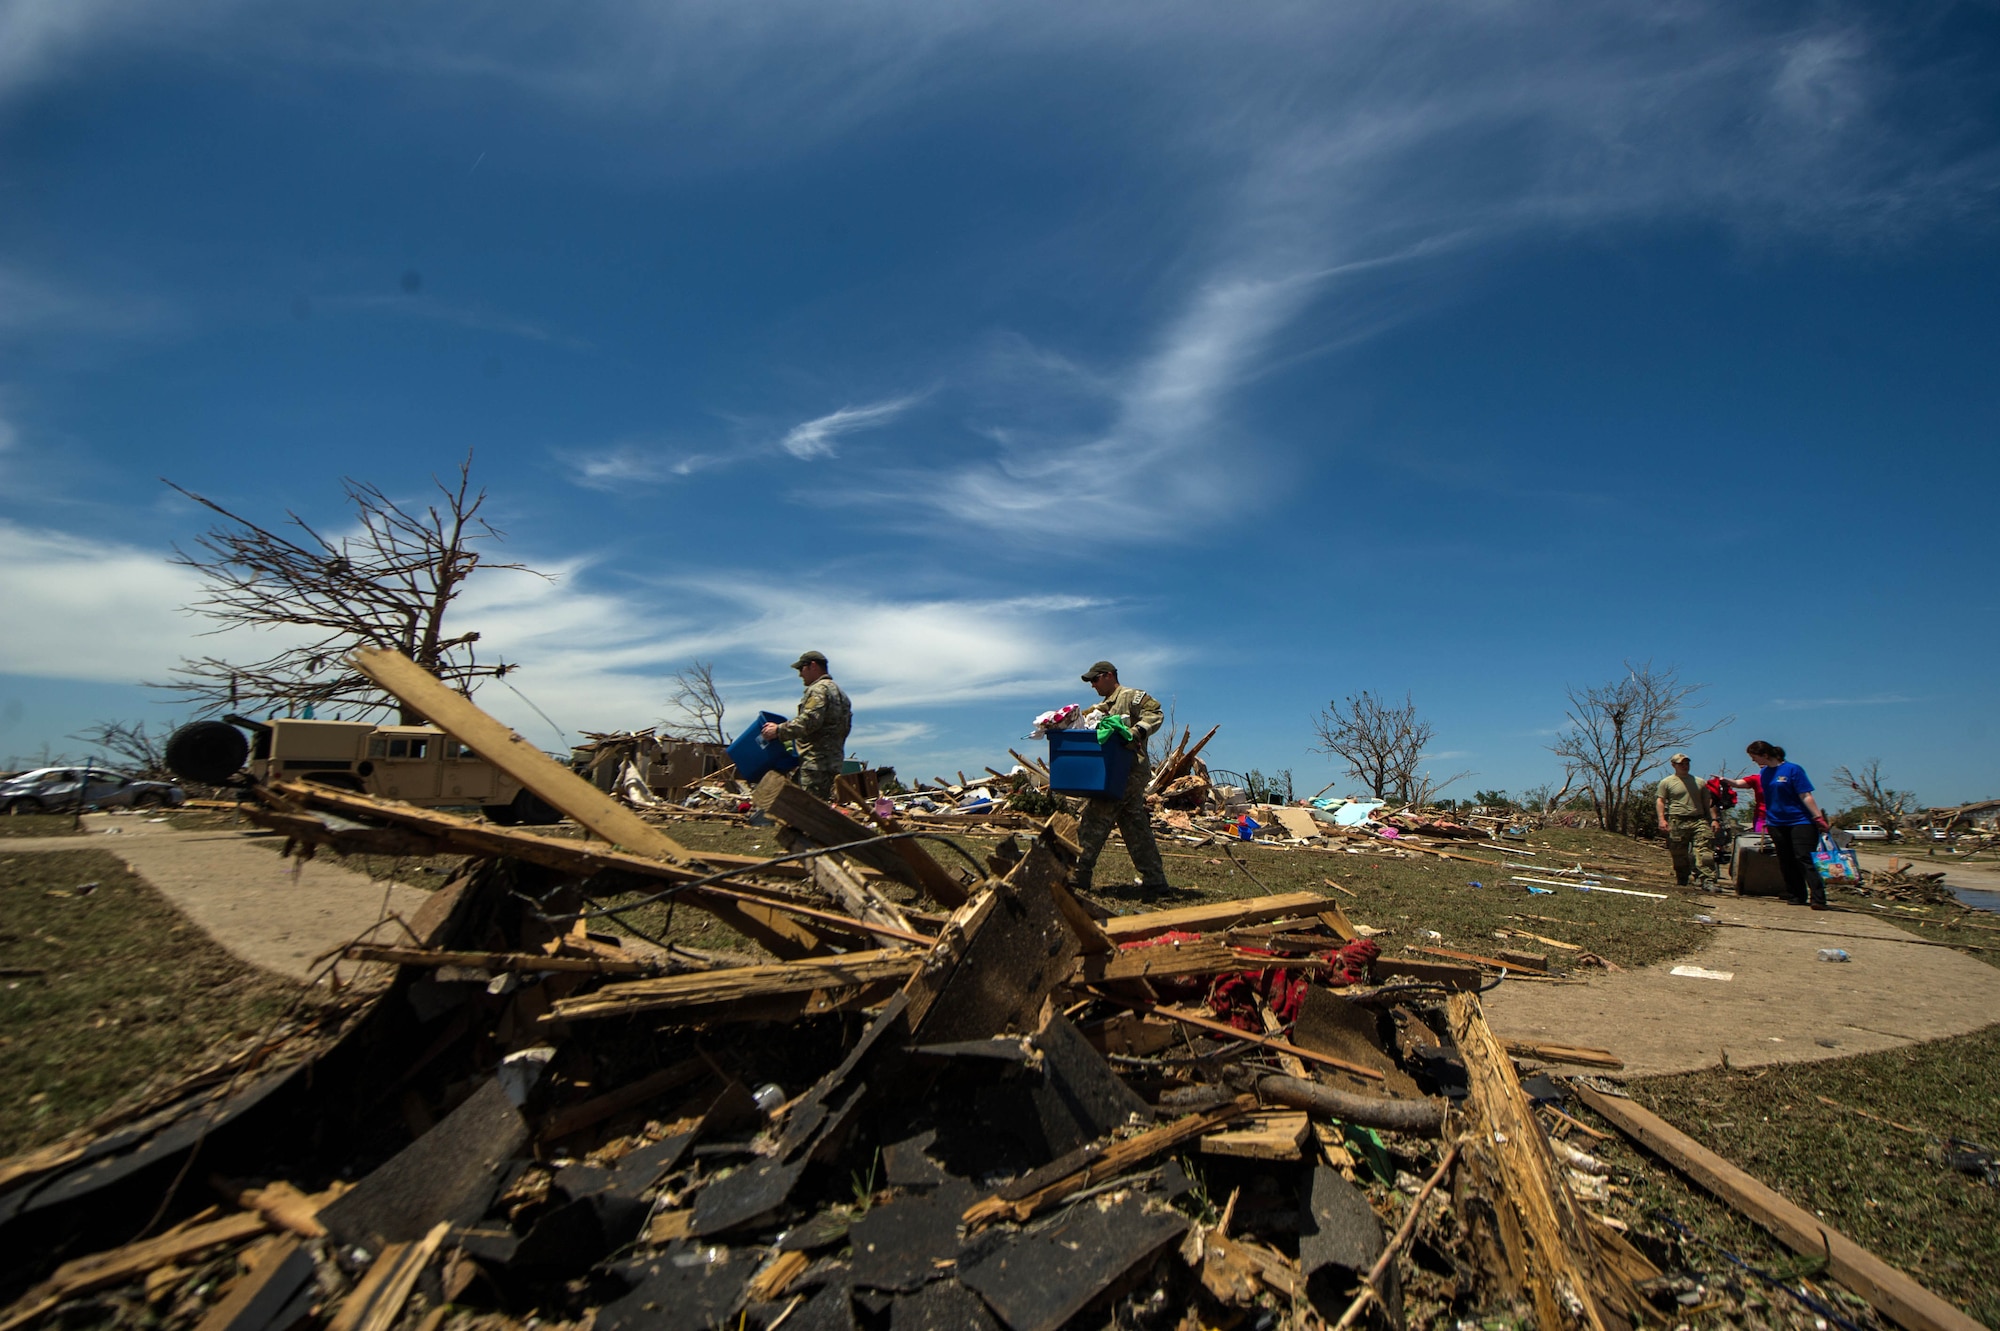 Airmen help a resident search through the debris looking for salvageable items May 22, 2013, in Moore, Okla.  An EF-5 tornado, with winds reaching at least 200 mph, traveled for 20 miles, leaving a two-mile-wide path of destruction, leveling homes, crushing vehicles, and killing more than 20 people May 20, 2013. More than 115 Oklahoma National Guard members have been activated to assist in the rescue and relief efforts.  (U.S. Air Force photo/Staff Sgt. Jonathan Snyder)  